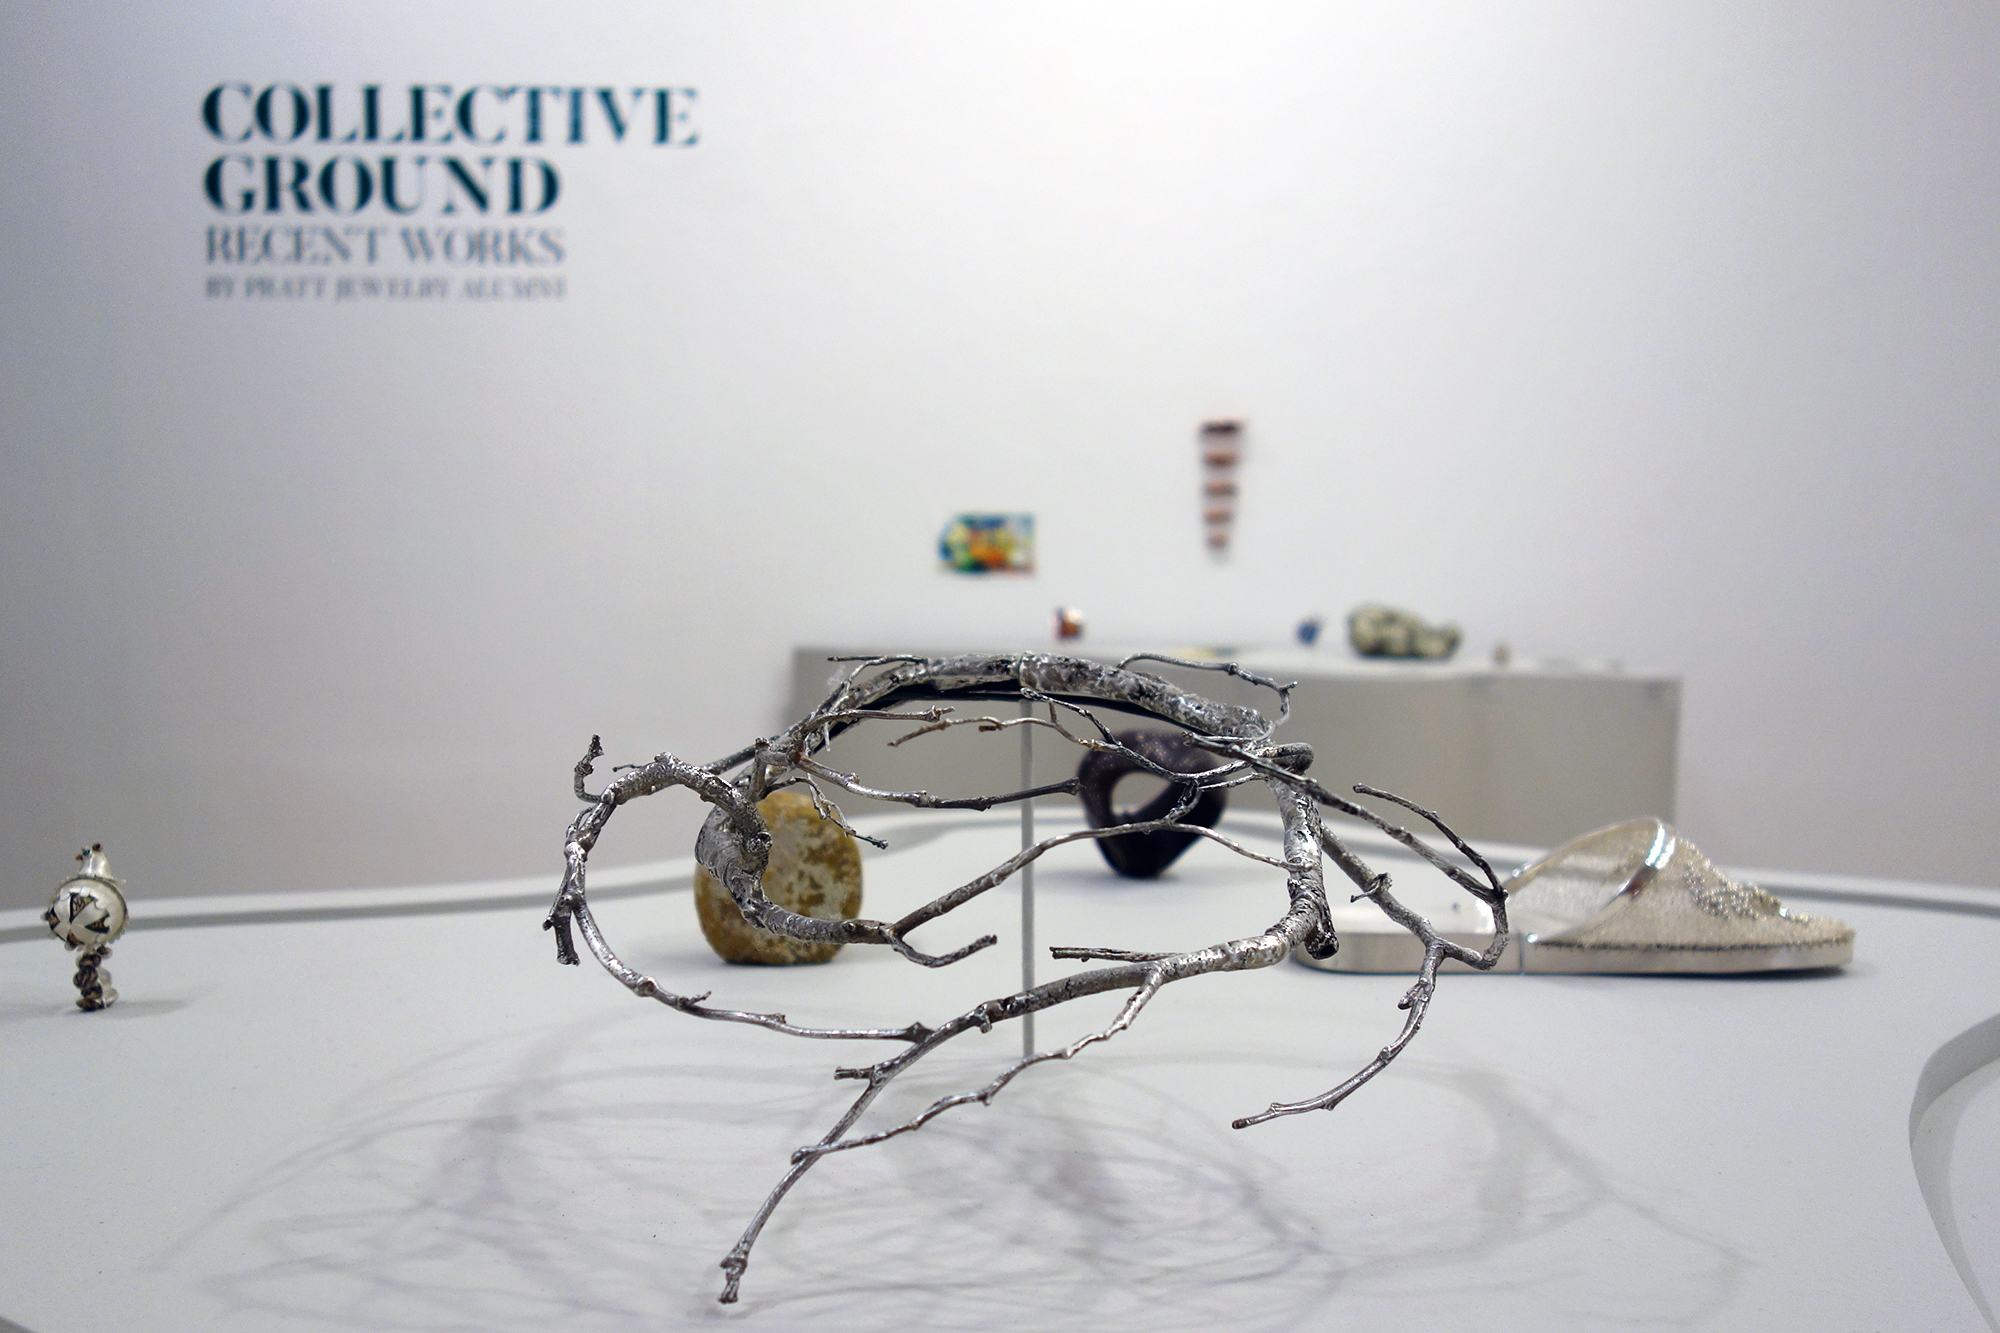 Installation view of Collective Ground at Steuben Gallery, with work by Carrie Bilbo at center